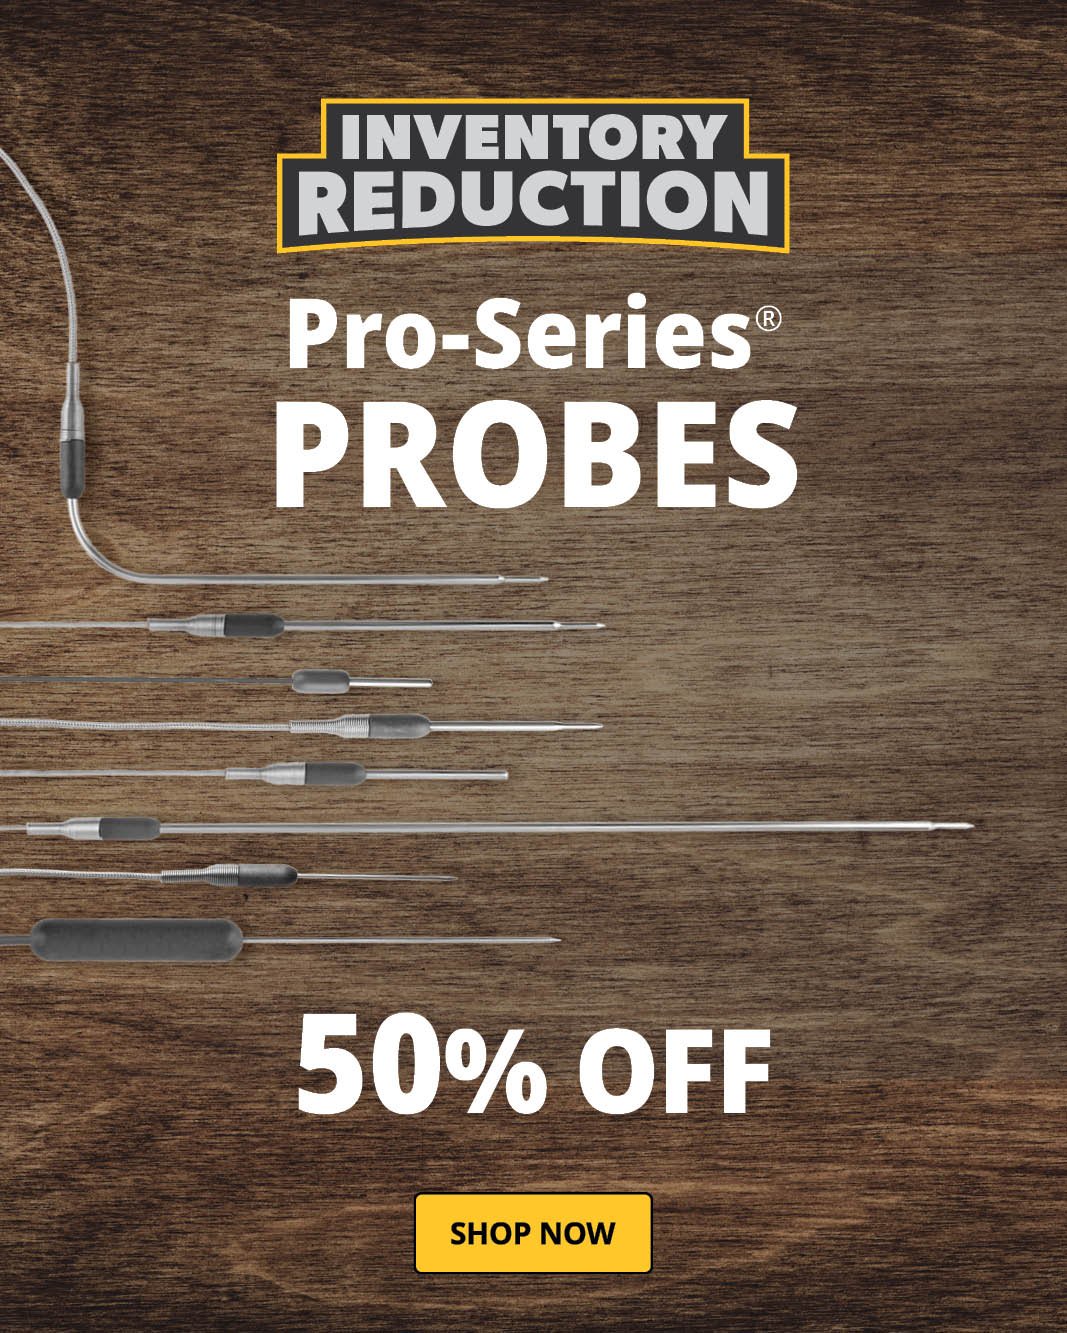 Pro-Series Probes - Up to 50% Off